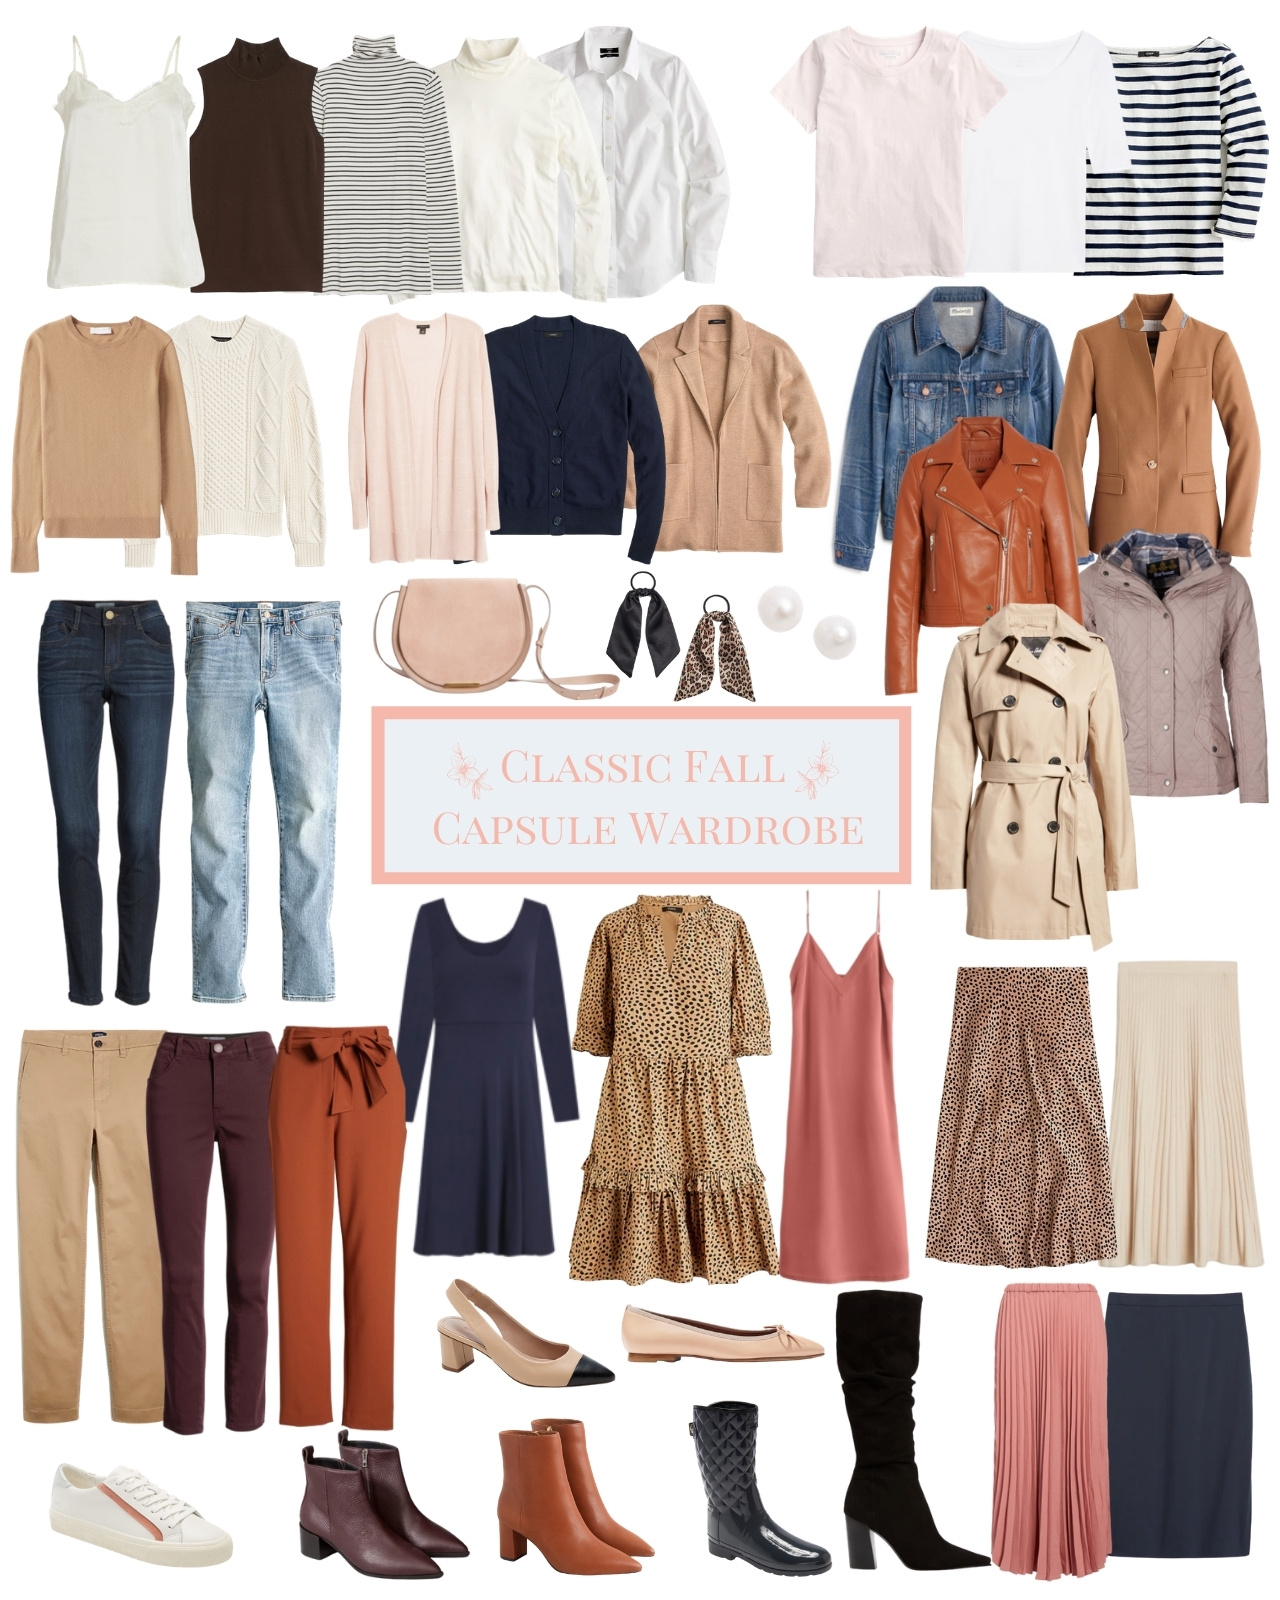 Pin on Capsule Wardrobe  Shopping Lists & Guides